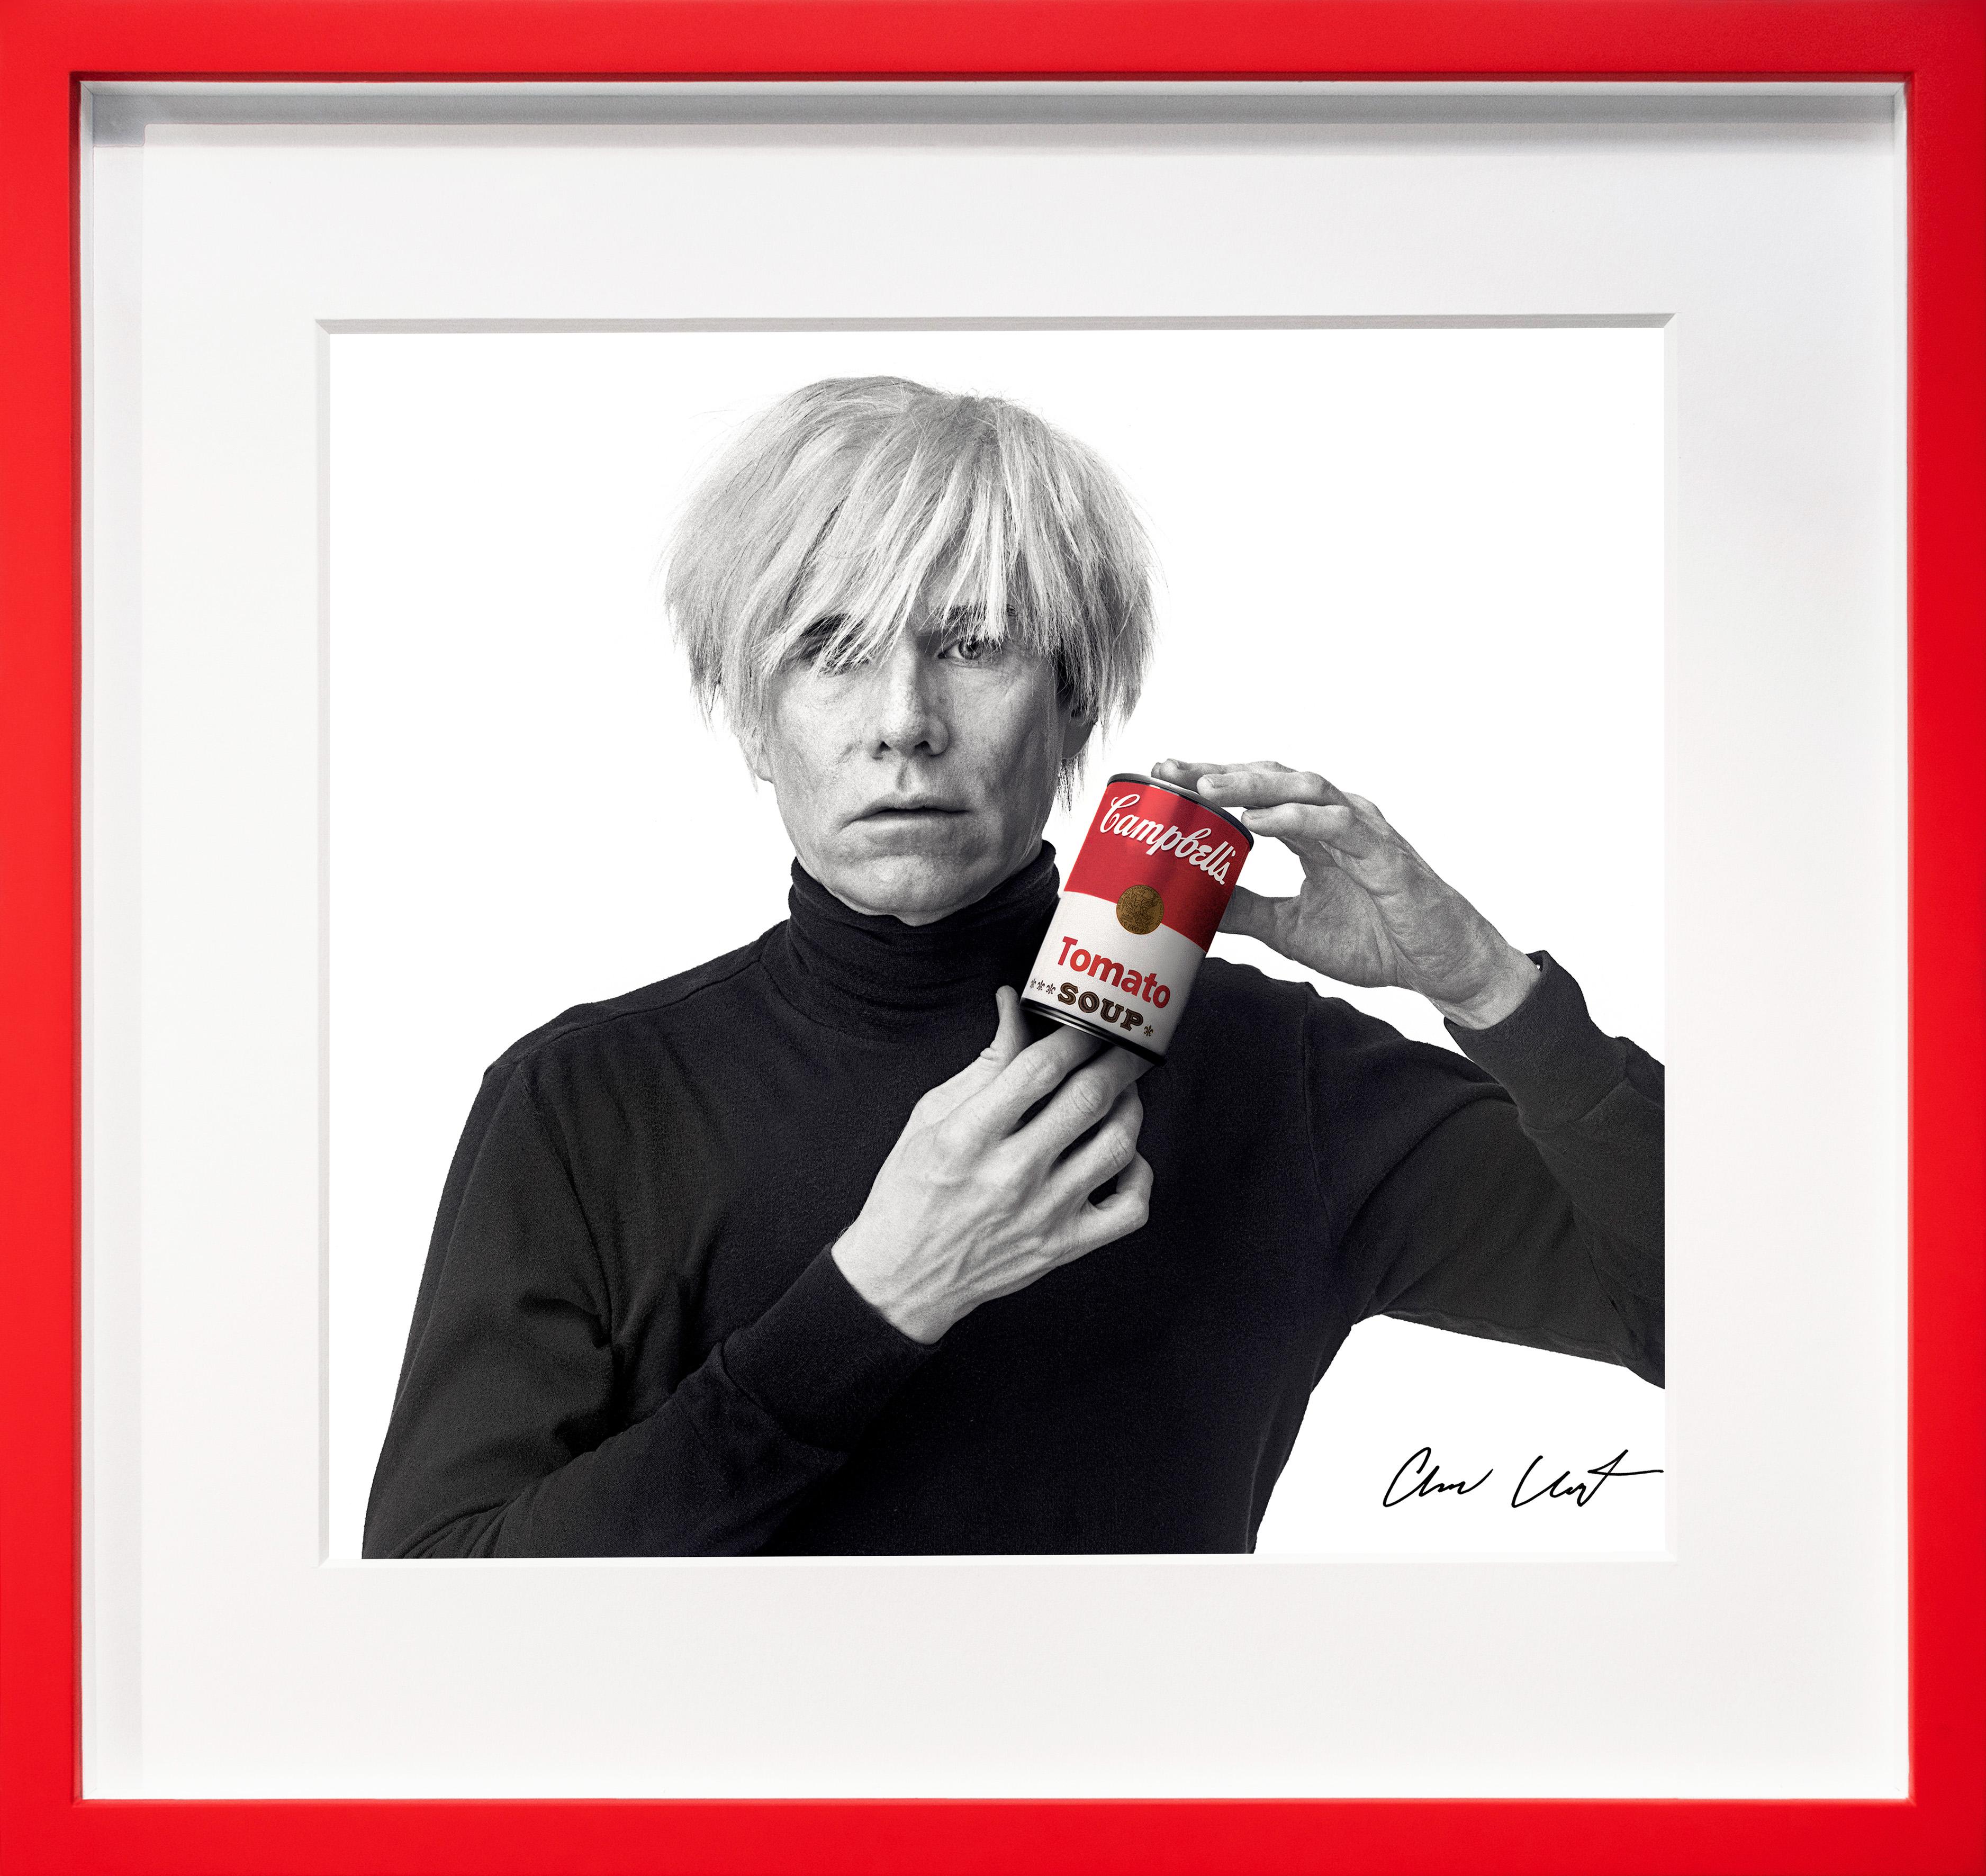 The archival photographic pop-art print, ‘Andy Warhol with Red Campbell’s Soup’  was created in 1985 by photographer Andrew Unangst. Taken in New York City, Unangst had the opportunity to meet and photograph Andy Warhol for a campaign with Vidal